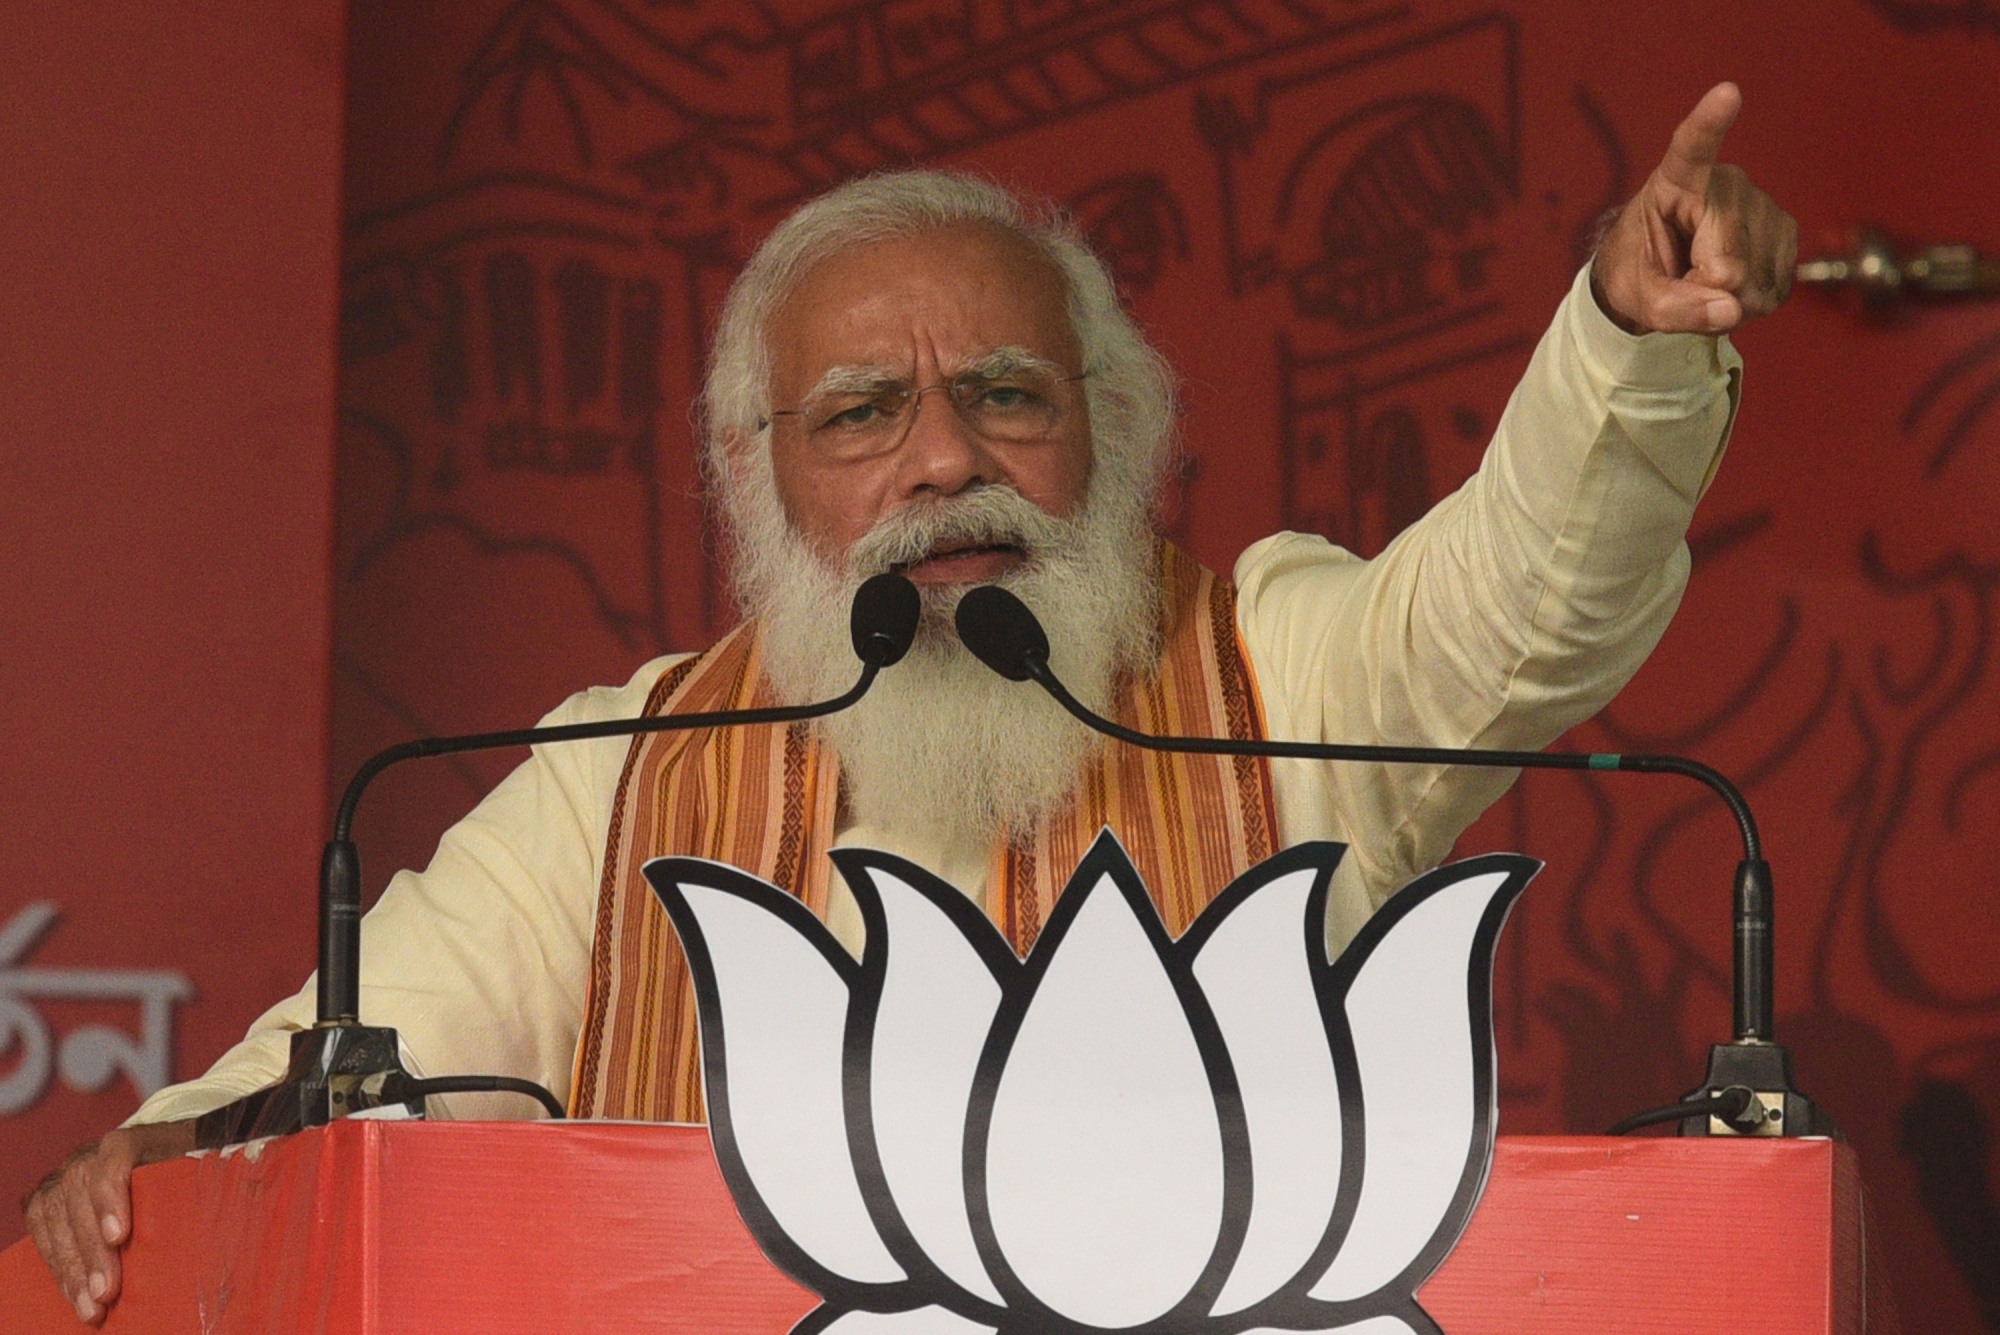 Will Narendra Modi face any consequences for India's COVID crisis?